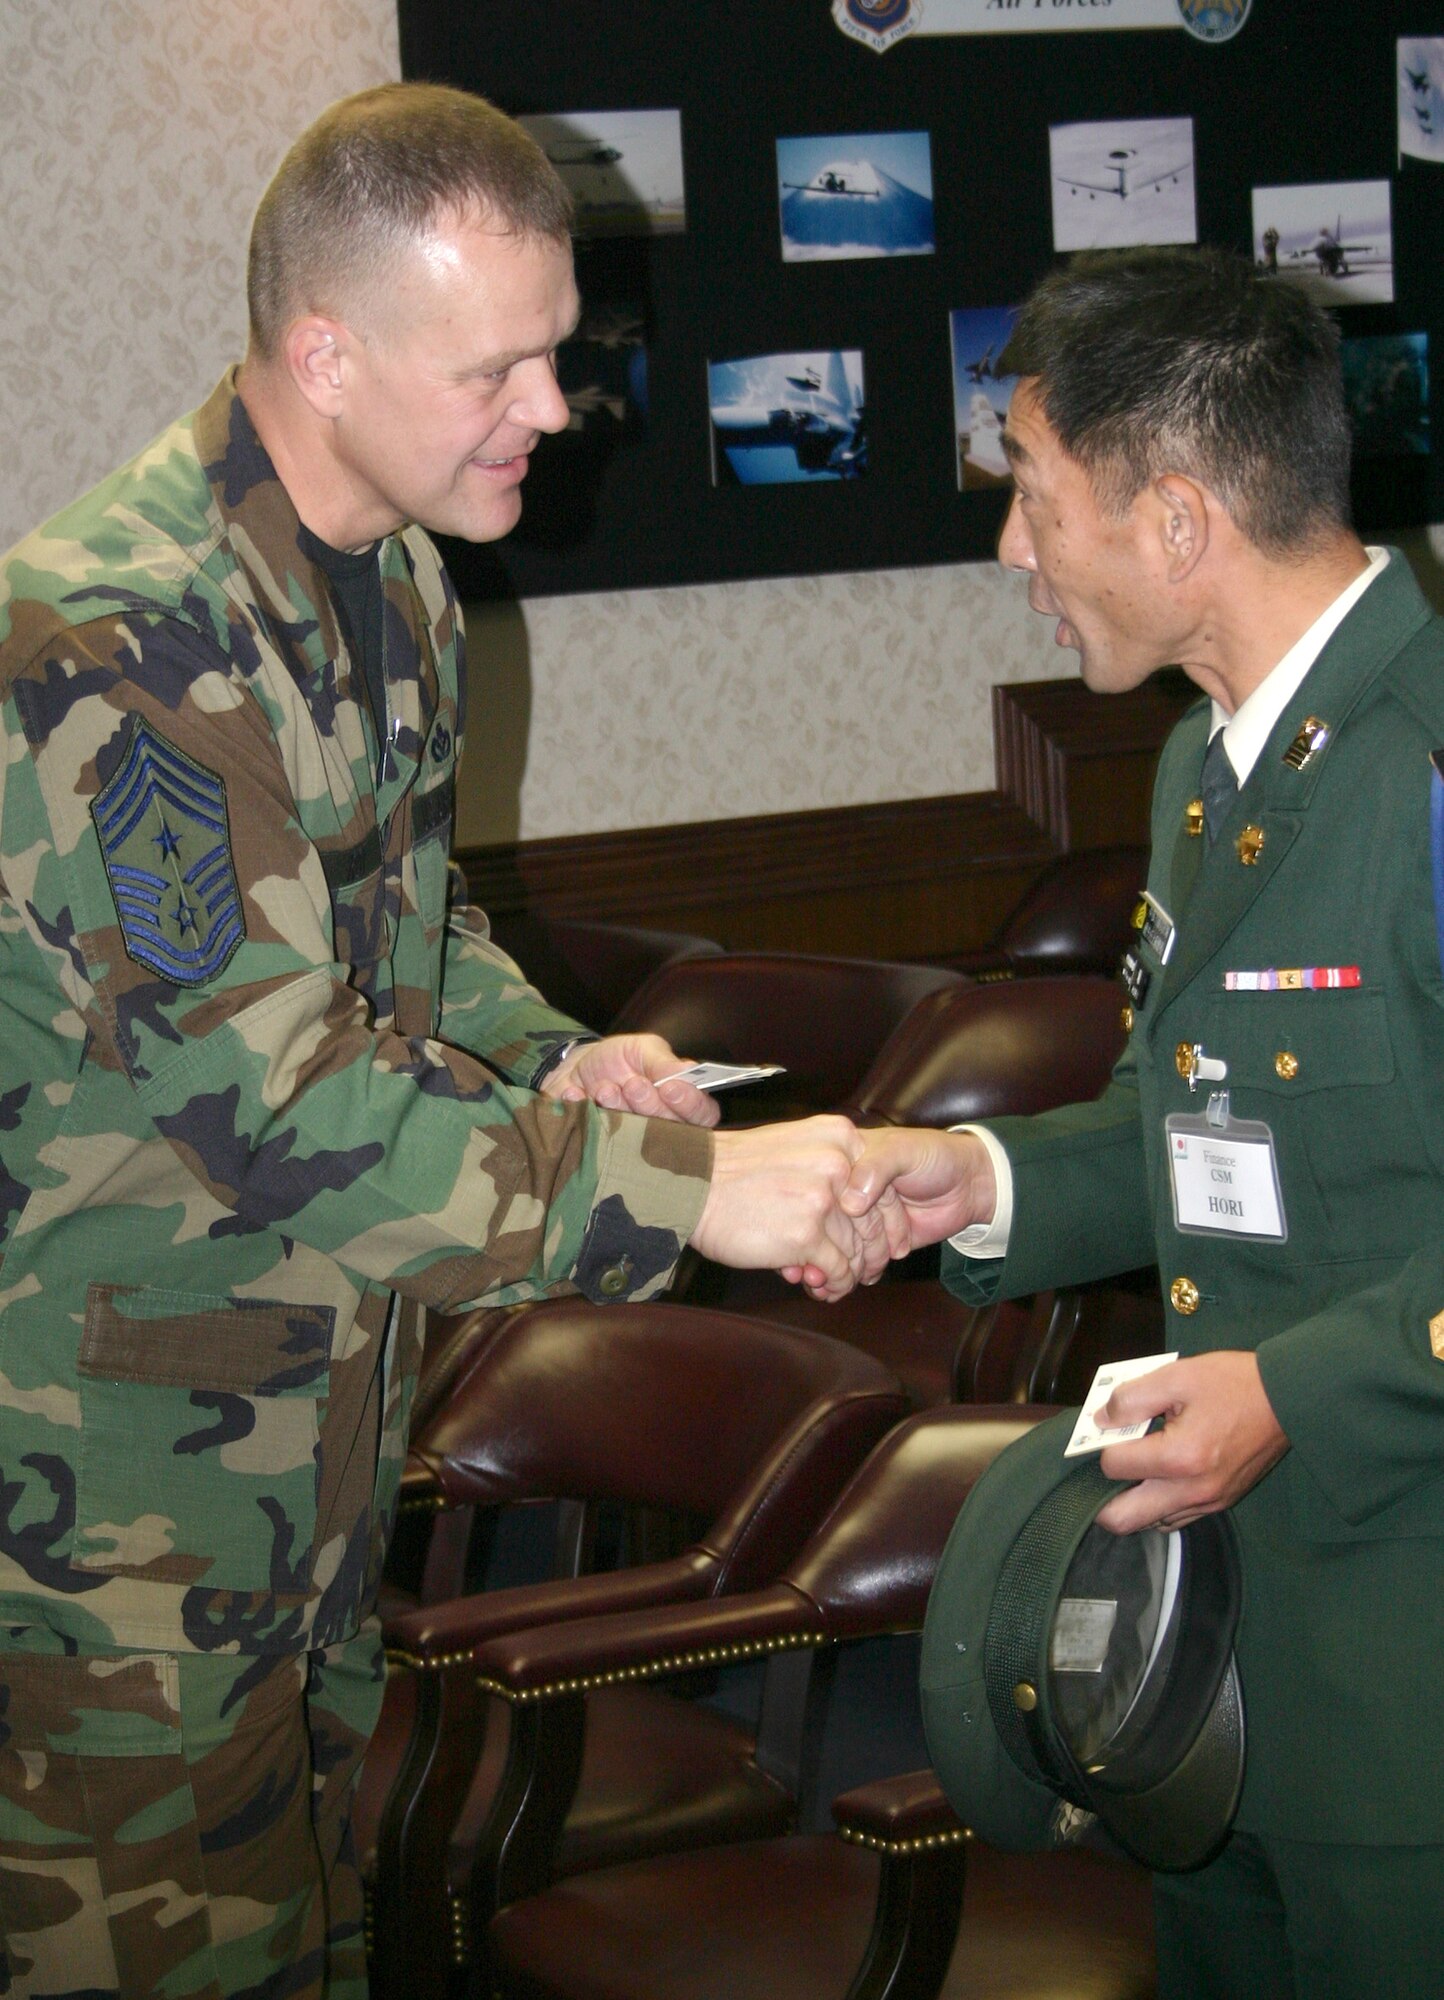 Chief Master Sgt. James Roy speaks to Japanese Ground Self Defense Force Warrant Officer Katsuhiko Hori Nov. 29 at Yokota Air Base, Japan, during a senior enlisted leader exchange conference. Fifth Air Force and U.S. Forces Japan served as host for a 17-member delegation of Japanese senior enlisted leaders interested in learning best practices and improving enlisted force development in the Japanese army. Chief Roy is the command chief for 5th AF and U.S. Forces Japan and Warrant Officer Hori is the command sergeant major of the Japanese Middle Army Finance Command. (U.S. Marine photo/Master Sgt. Terence R. Peck)